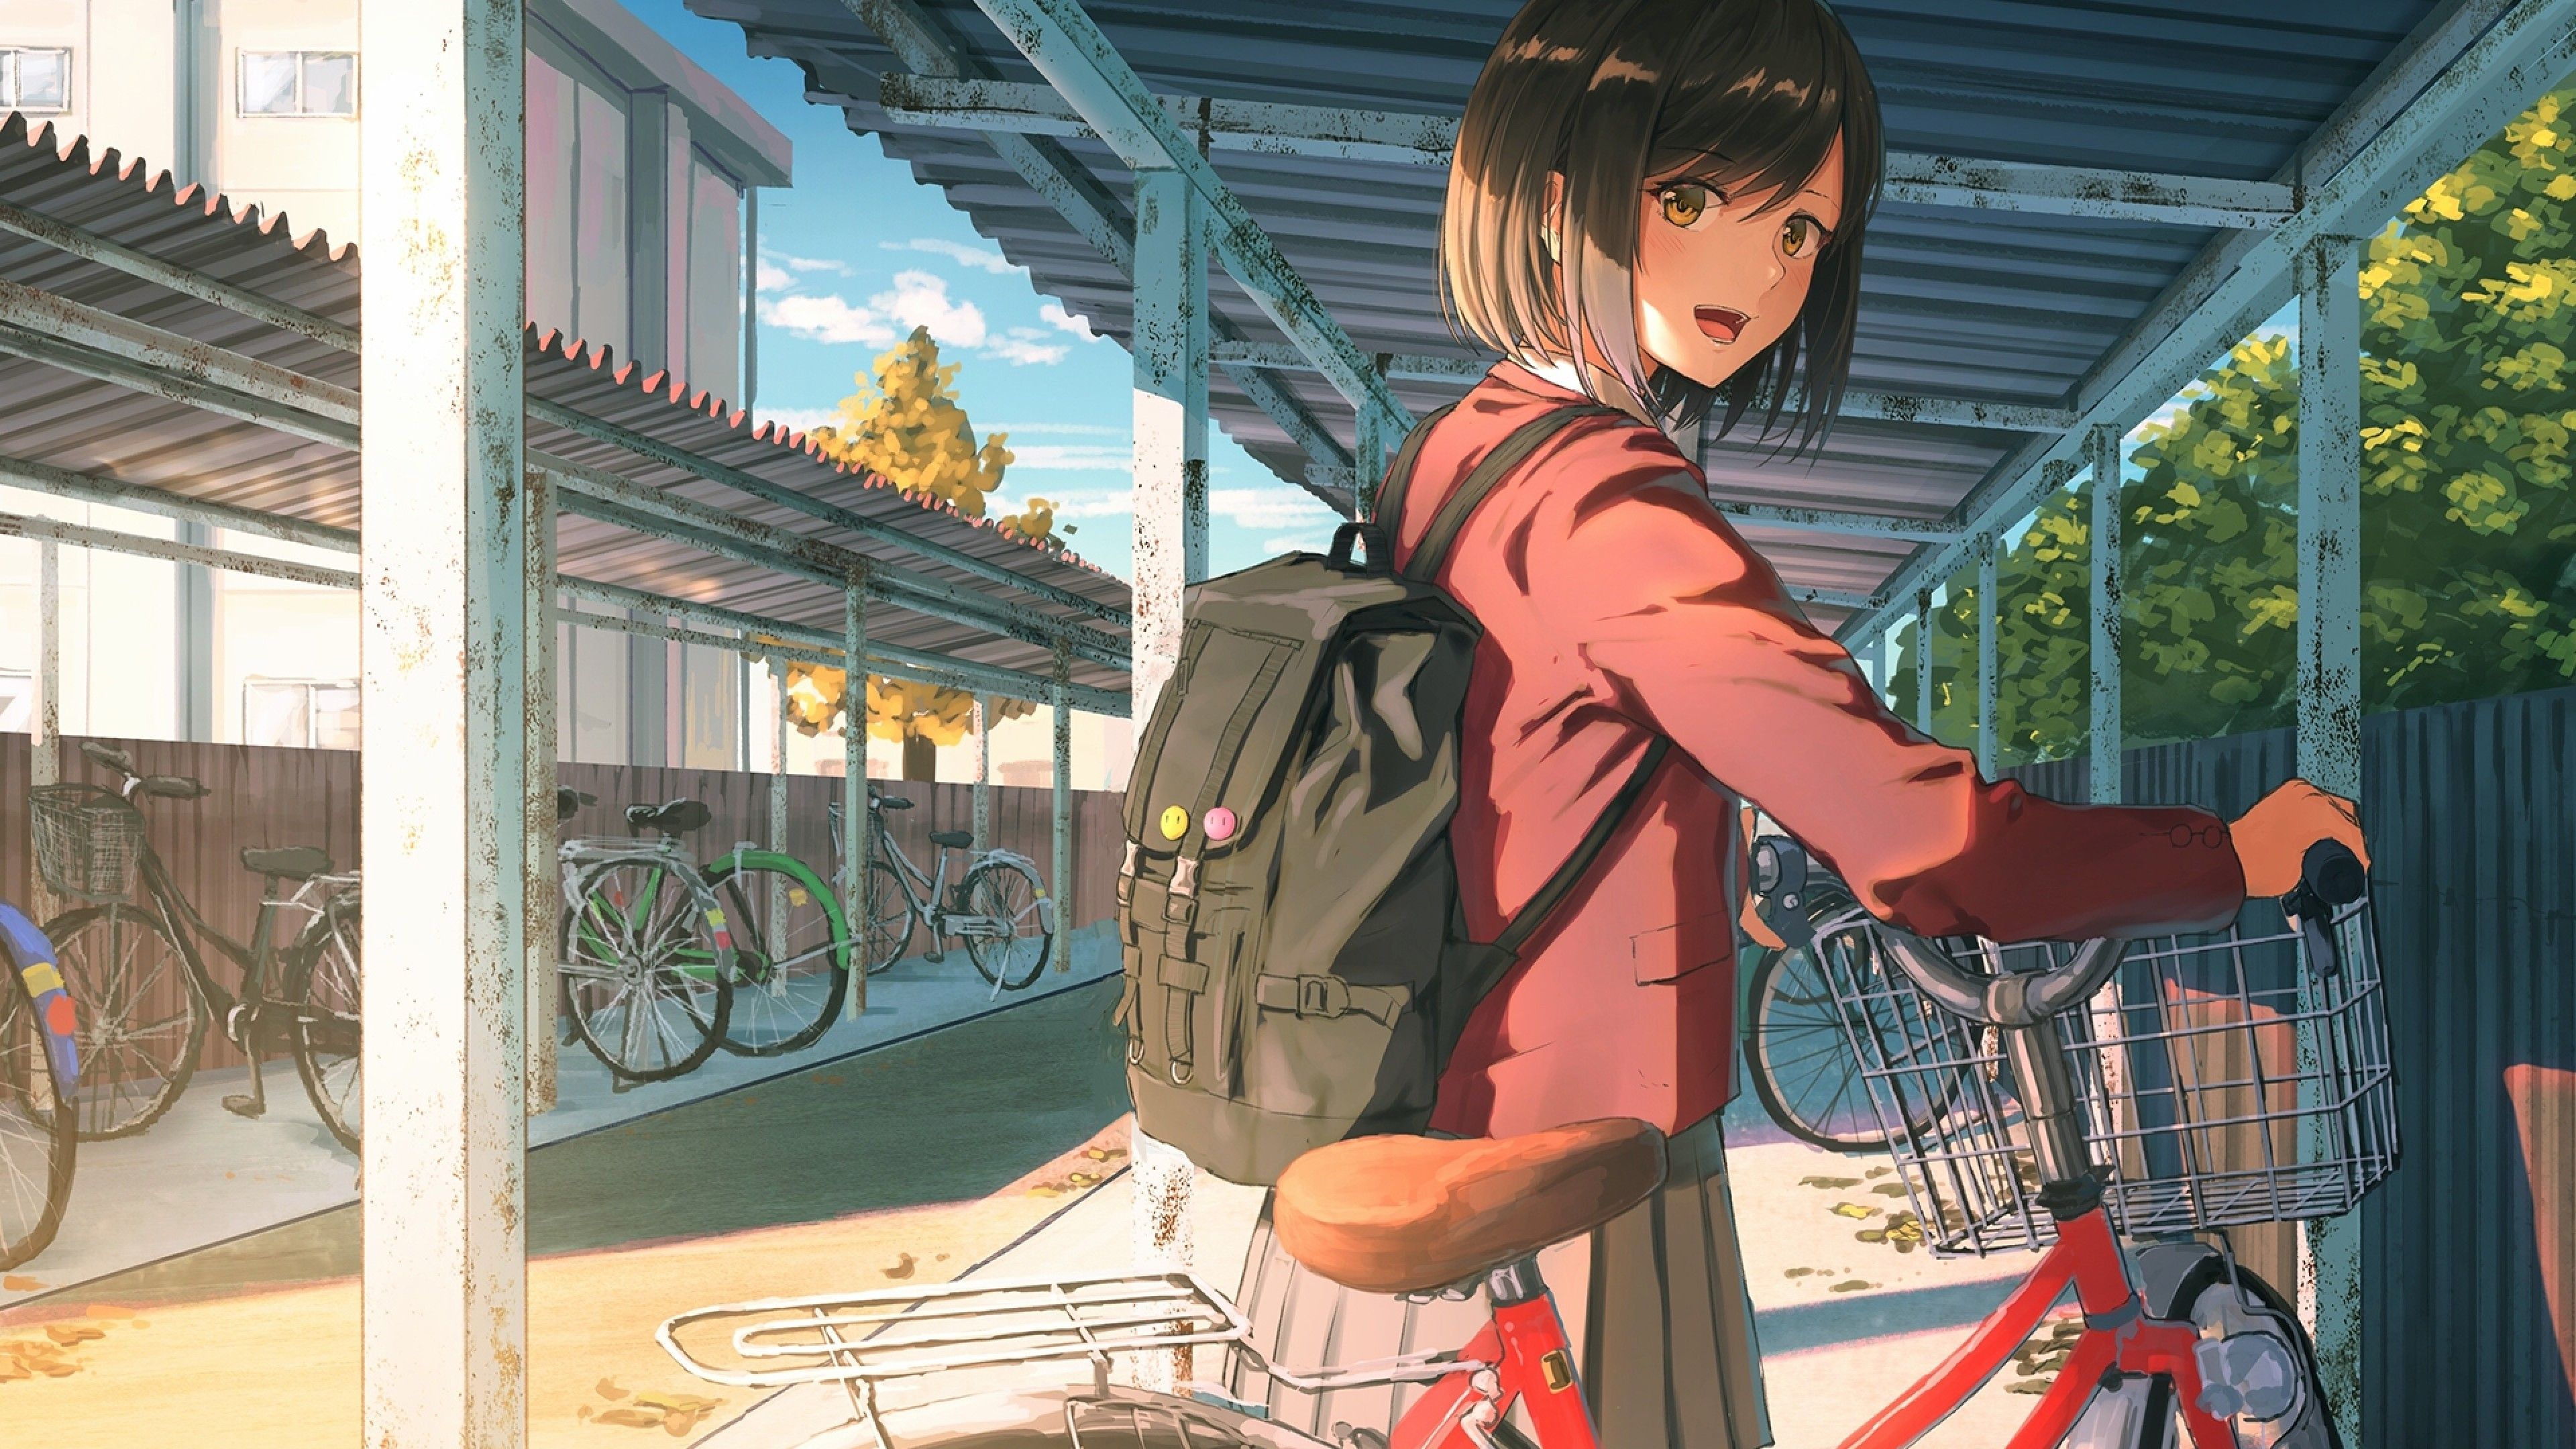 Download 3840x2160 Anime School Girl, Bicycle, Sunlight, Slice Of Life Wallpaper for UHD TV